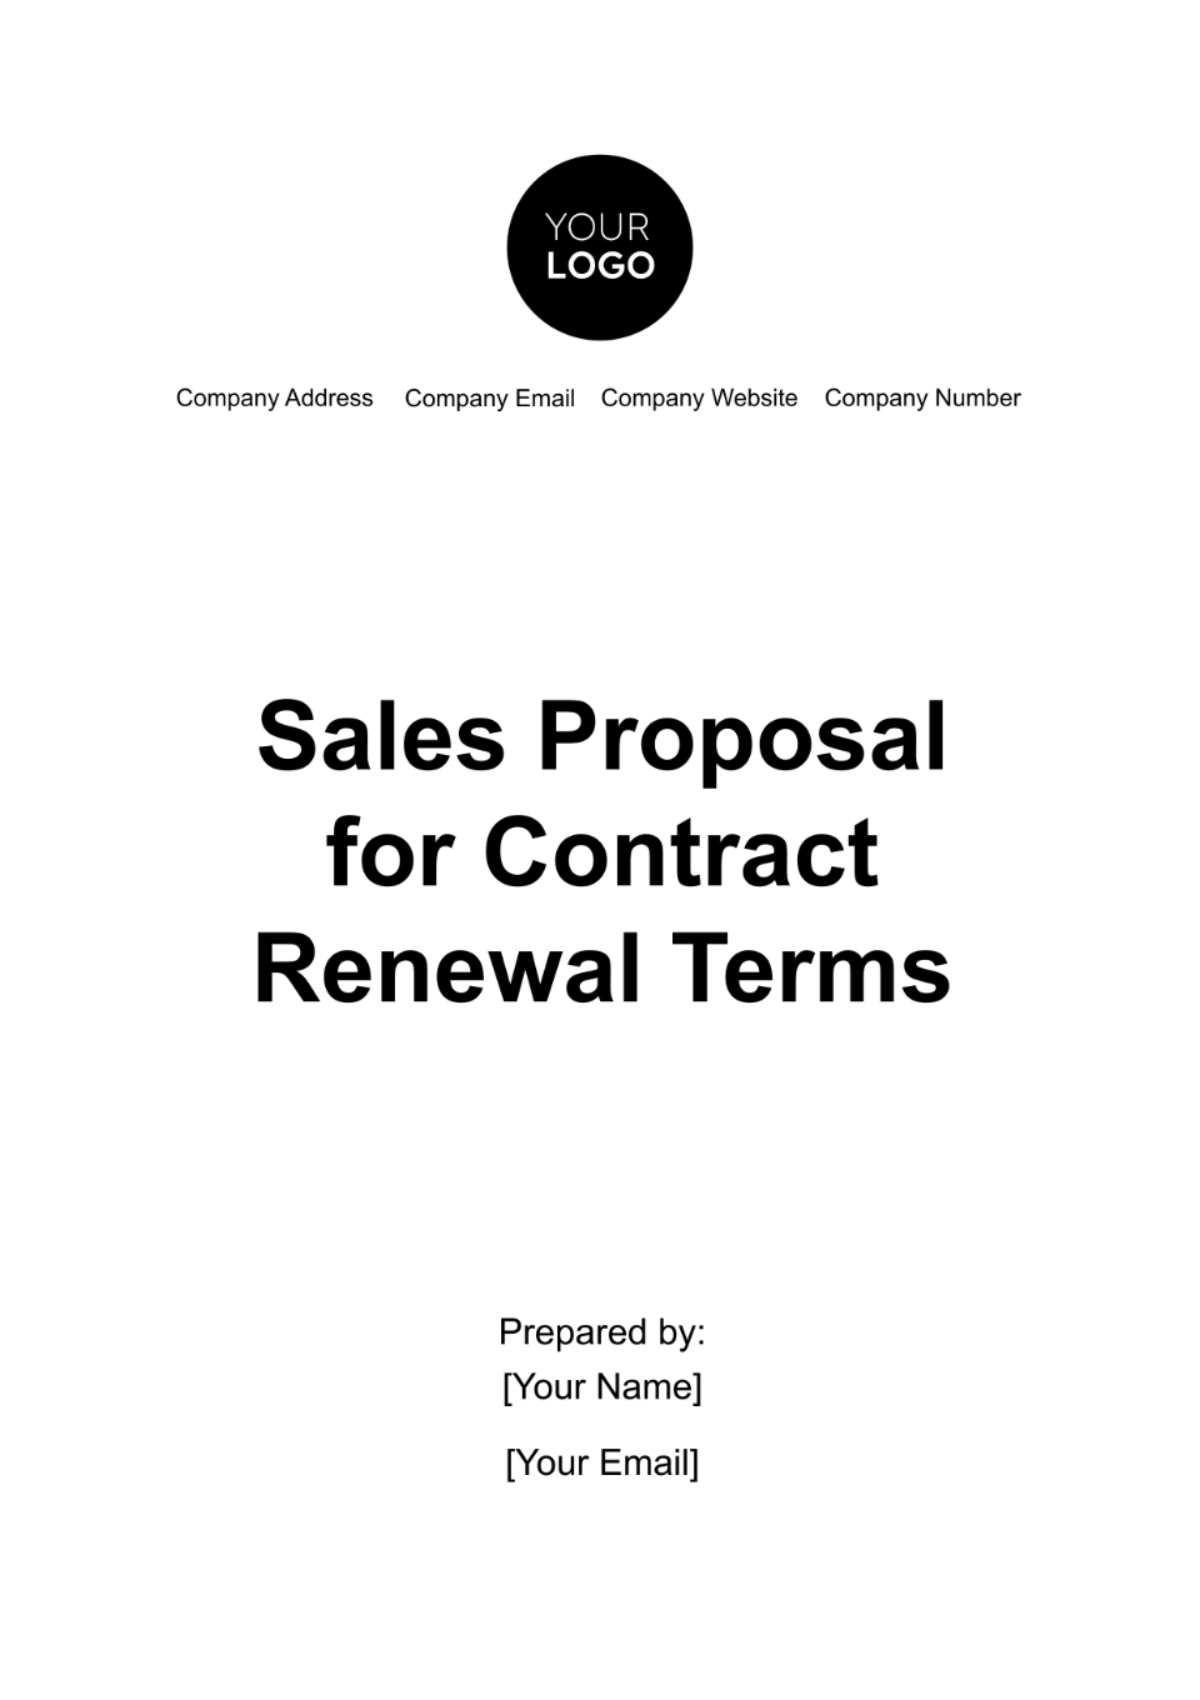 Free Sales Proposal for Contract Renewal Terms Template